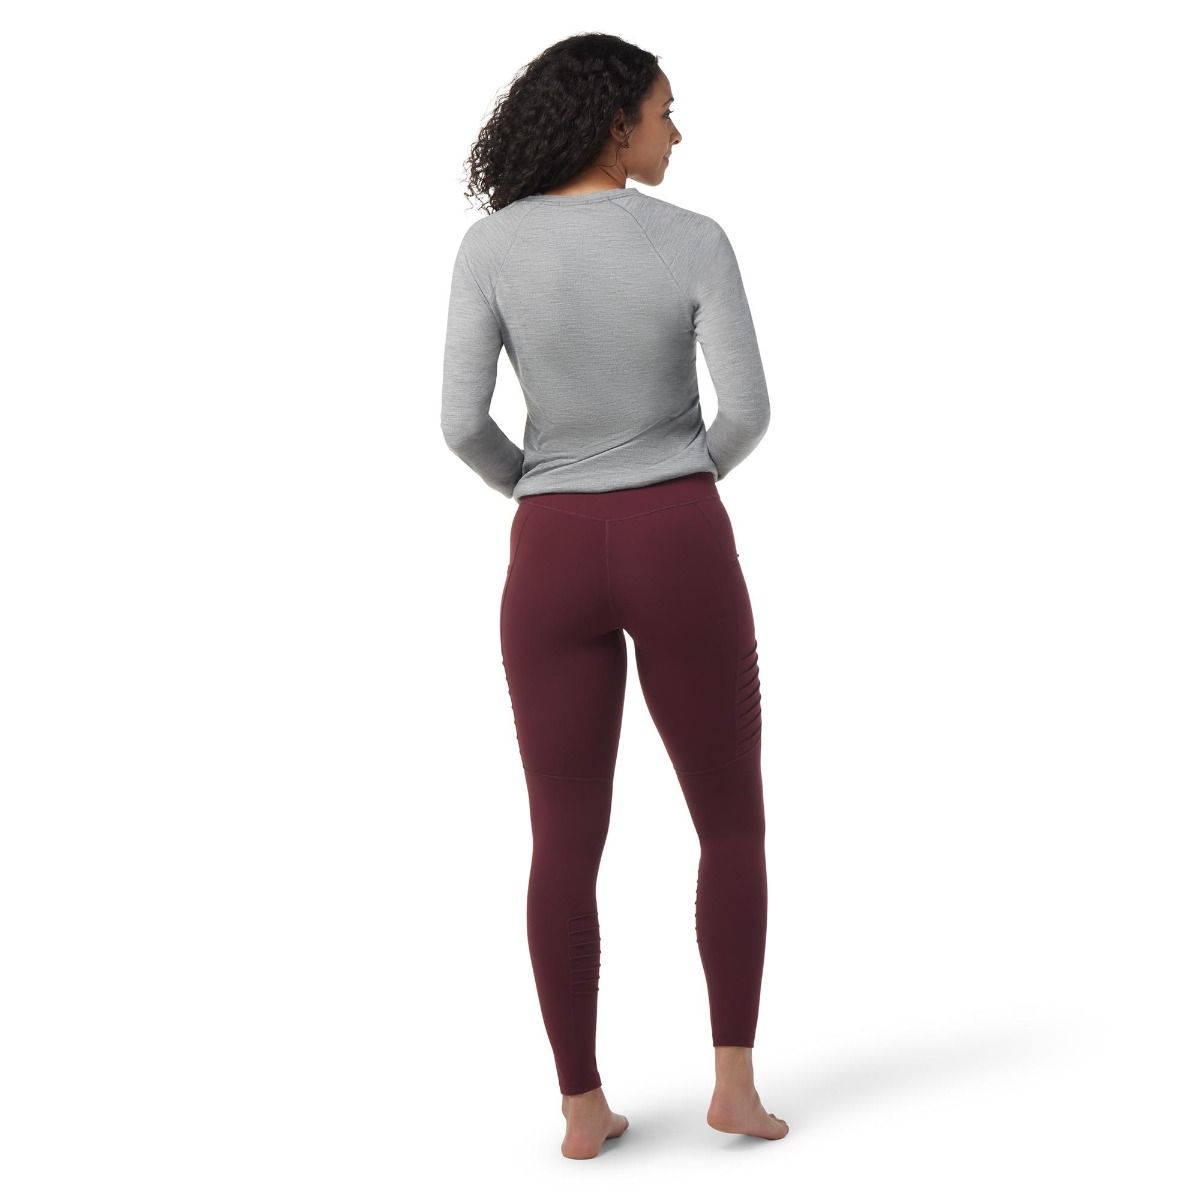 Lycot Womens Premium Quality Full Tight 4 Way For Sports Shop